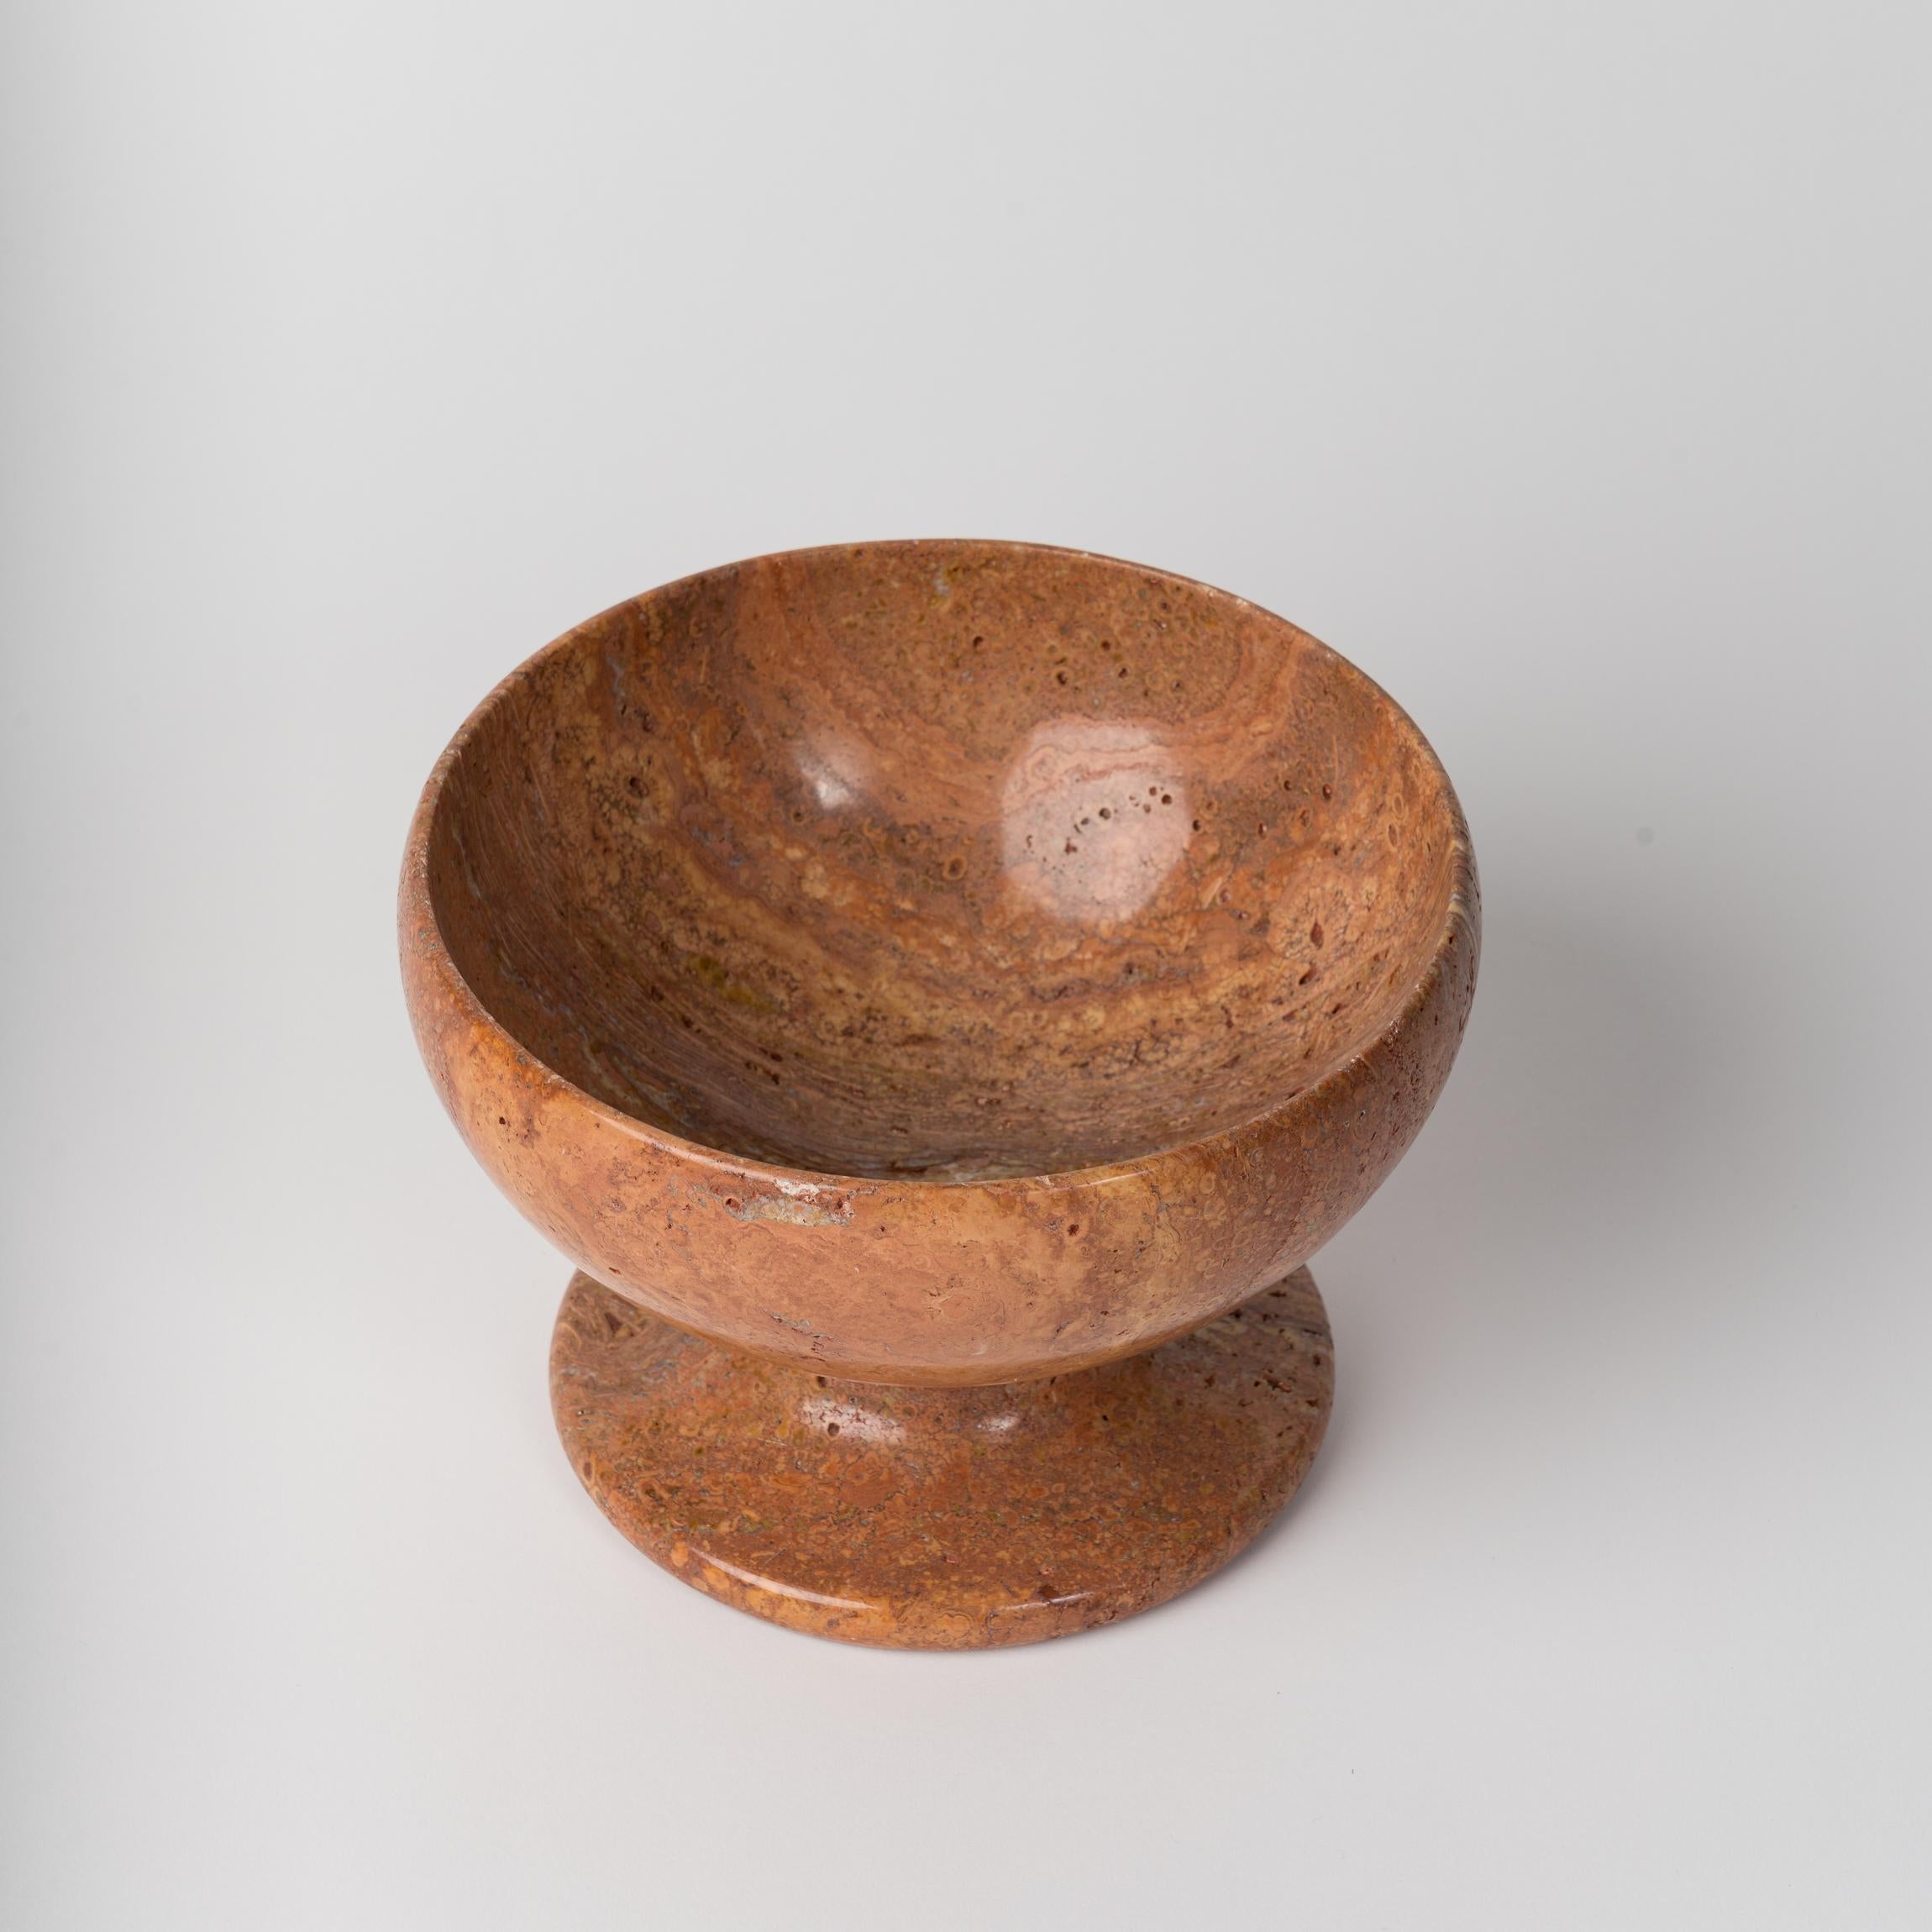 Red travertine decoratibe bowl. Can be used as a fruit bowl or as a purely decorative artefact or vide-poches.
In good vintage condition.
This piece will ship from France and can be returned to either France or to a LIC, NY location.
Price does